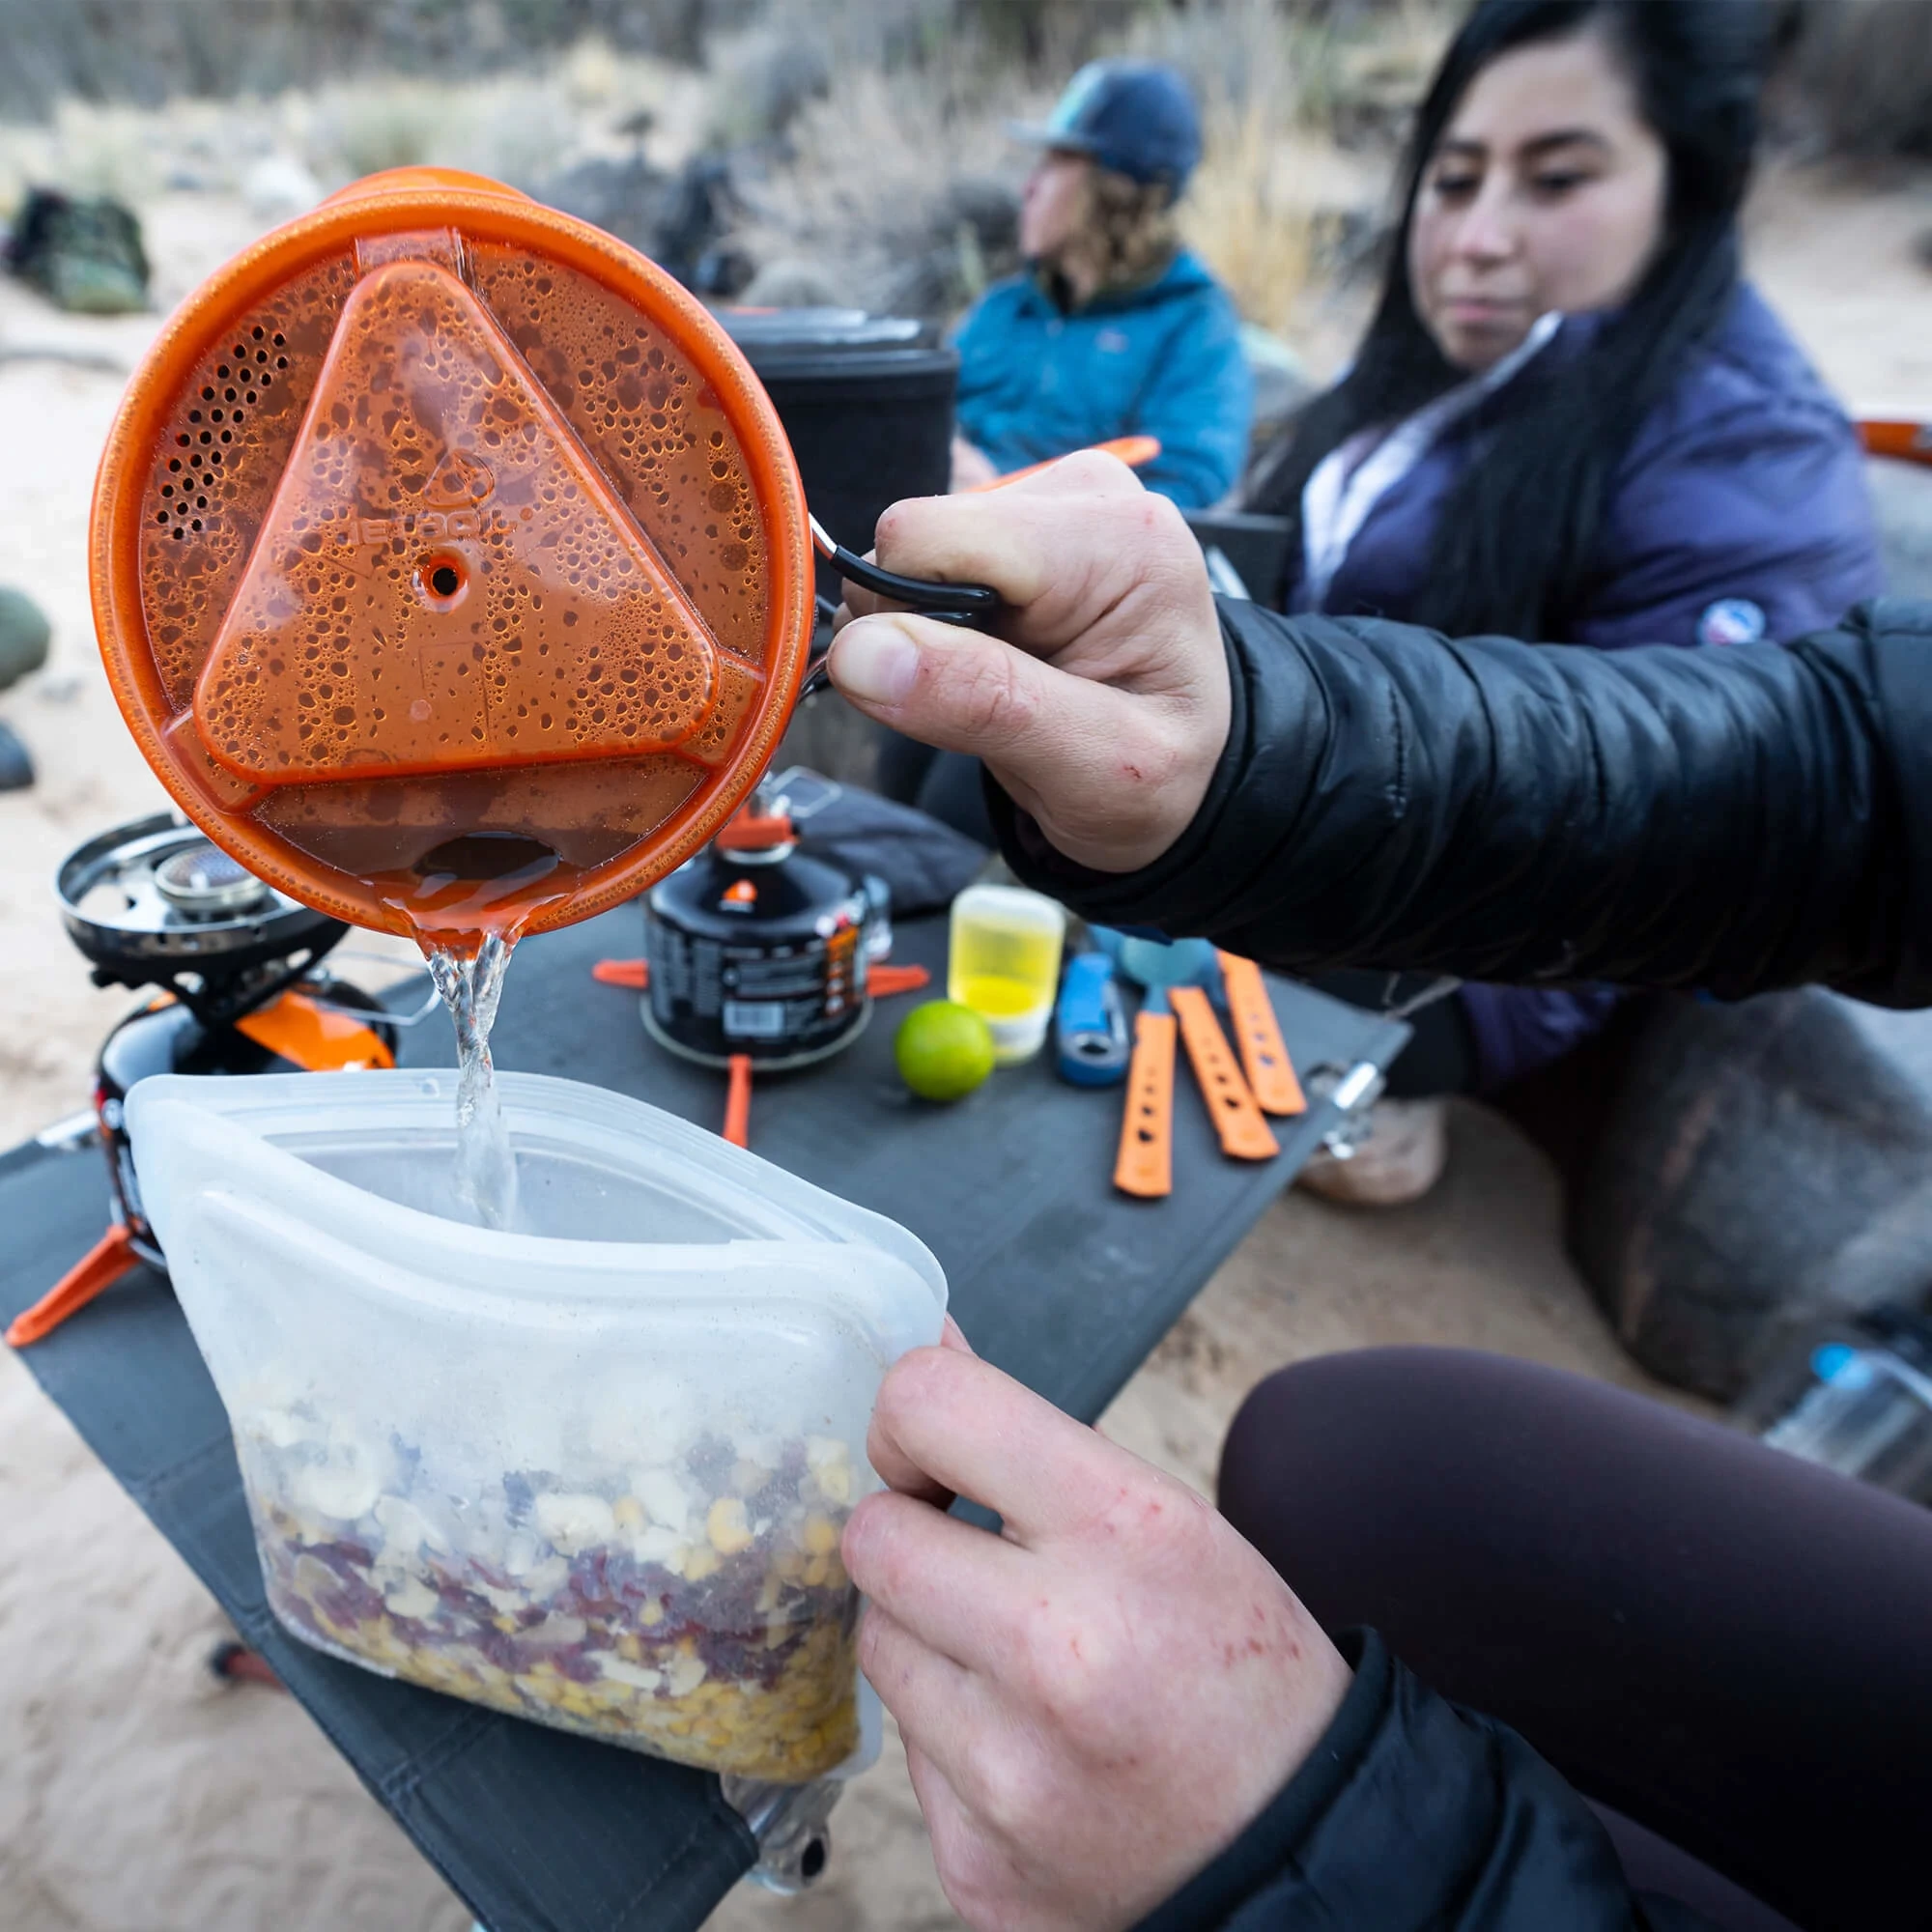 Pouring hot water from a Jetboil cooking system in to a stasher bag filled with food